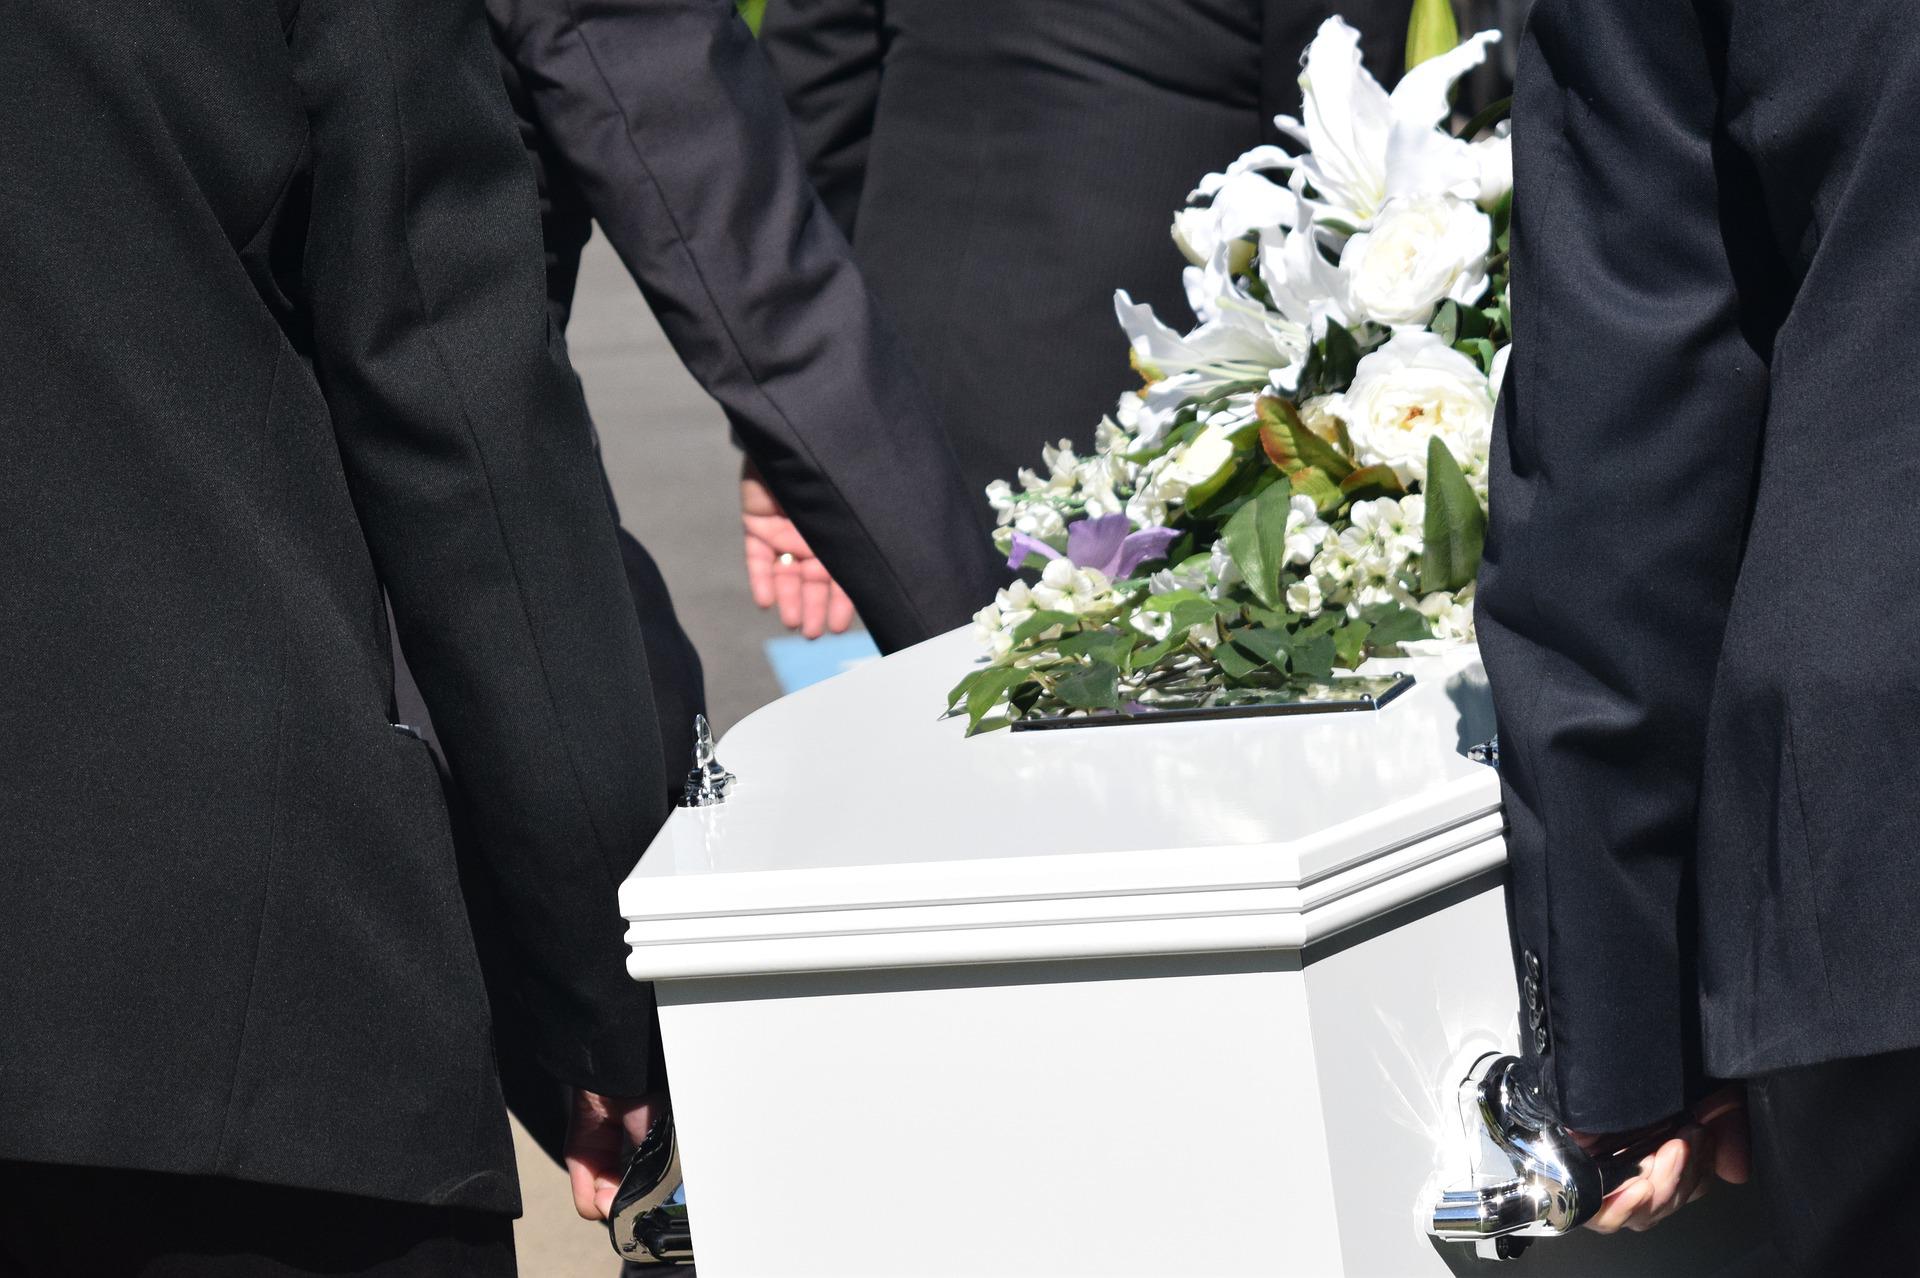 carrying coffin at funeral service